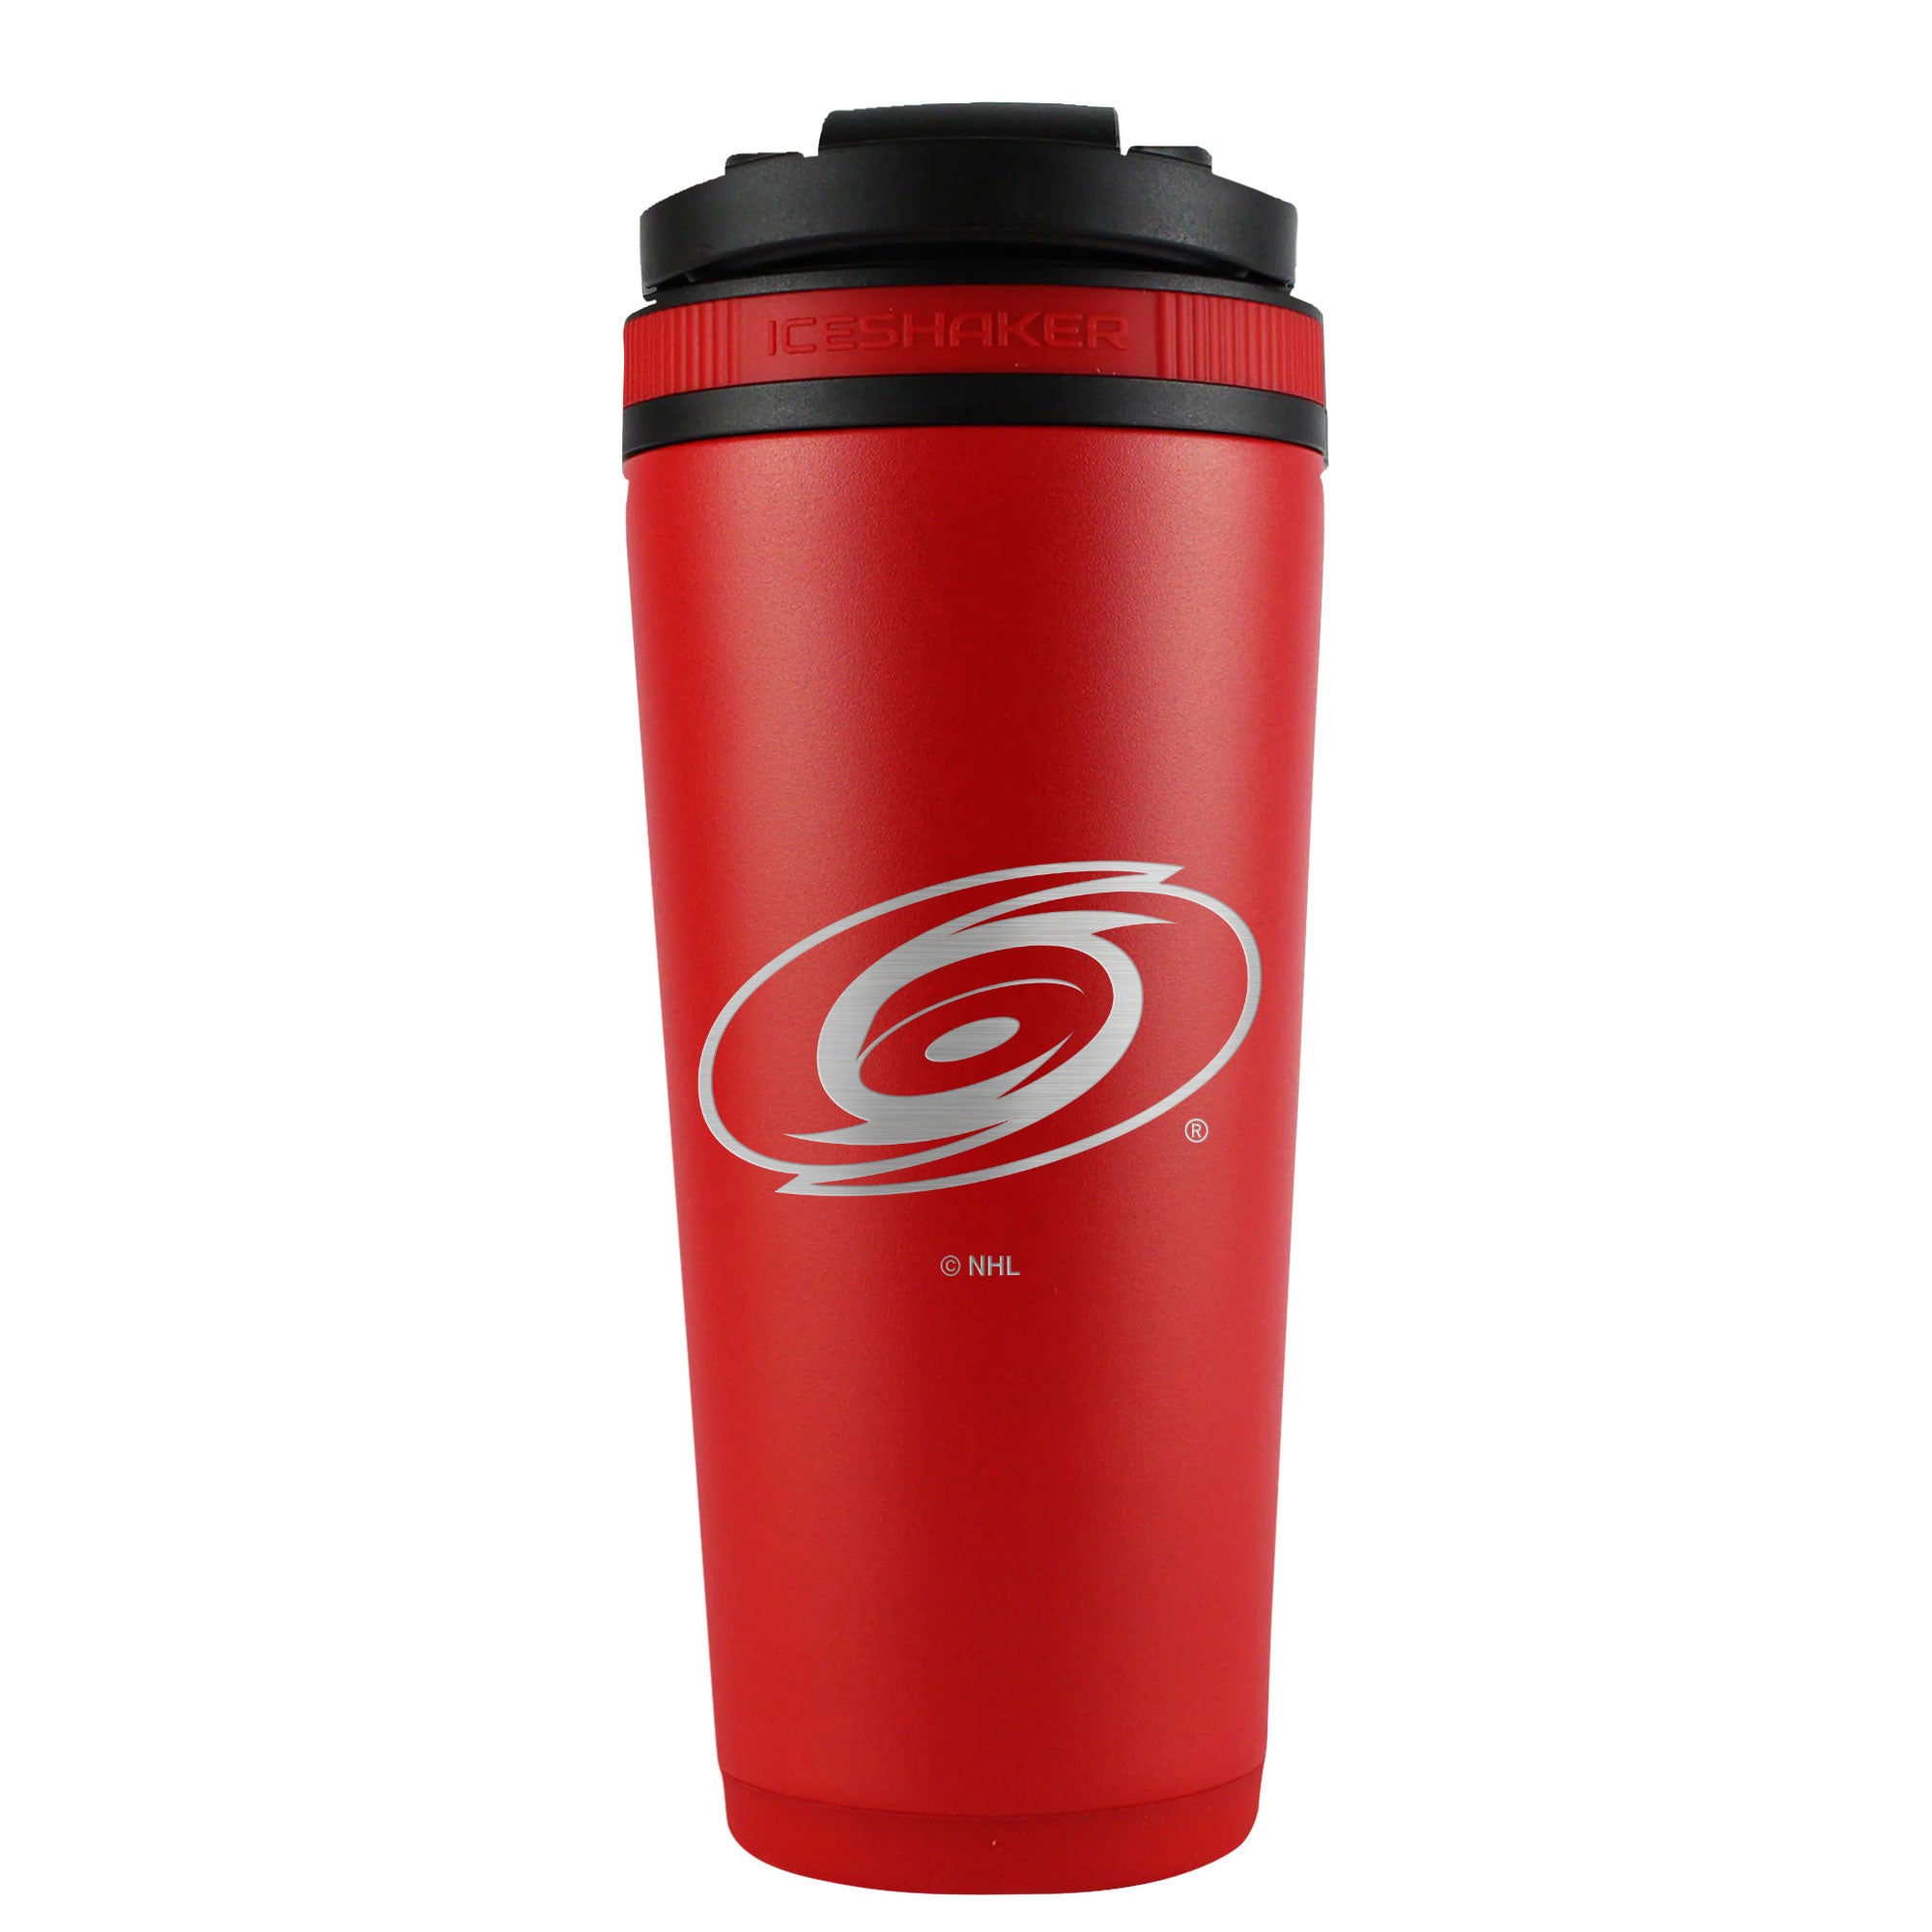 Officially Licensed Carolina Hurricanes 26oz Ice Shaker - Red